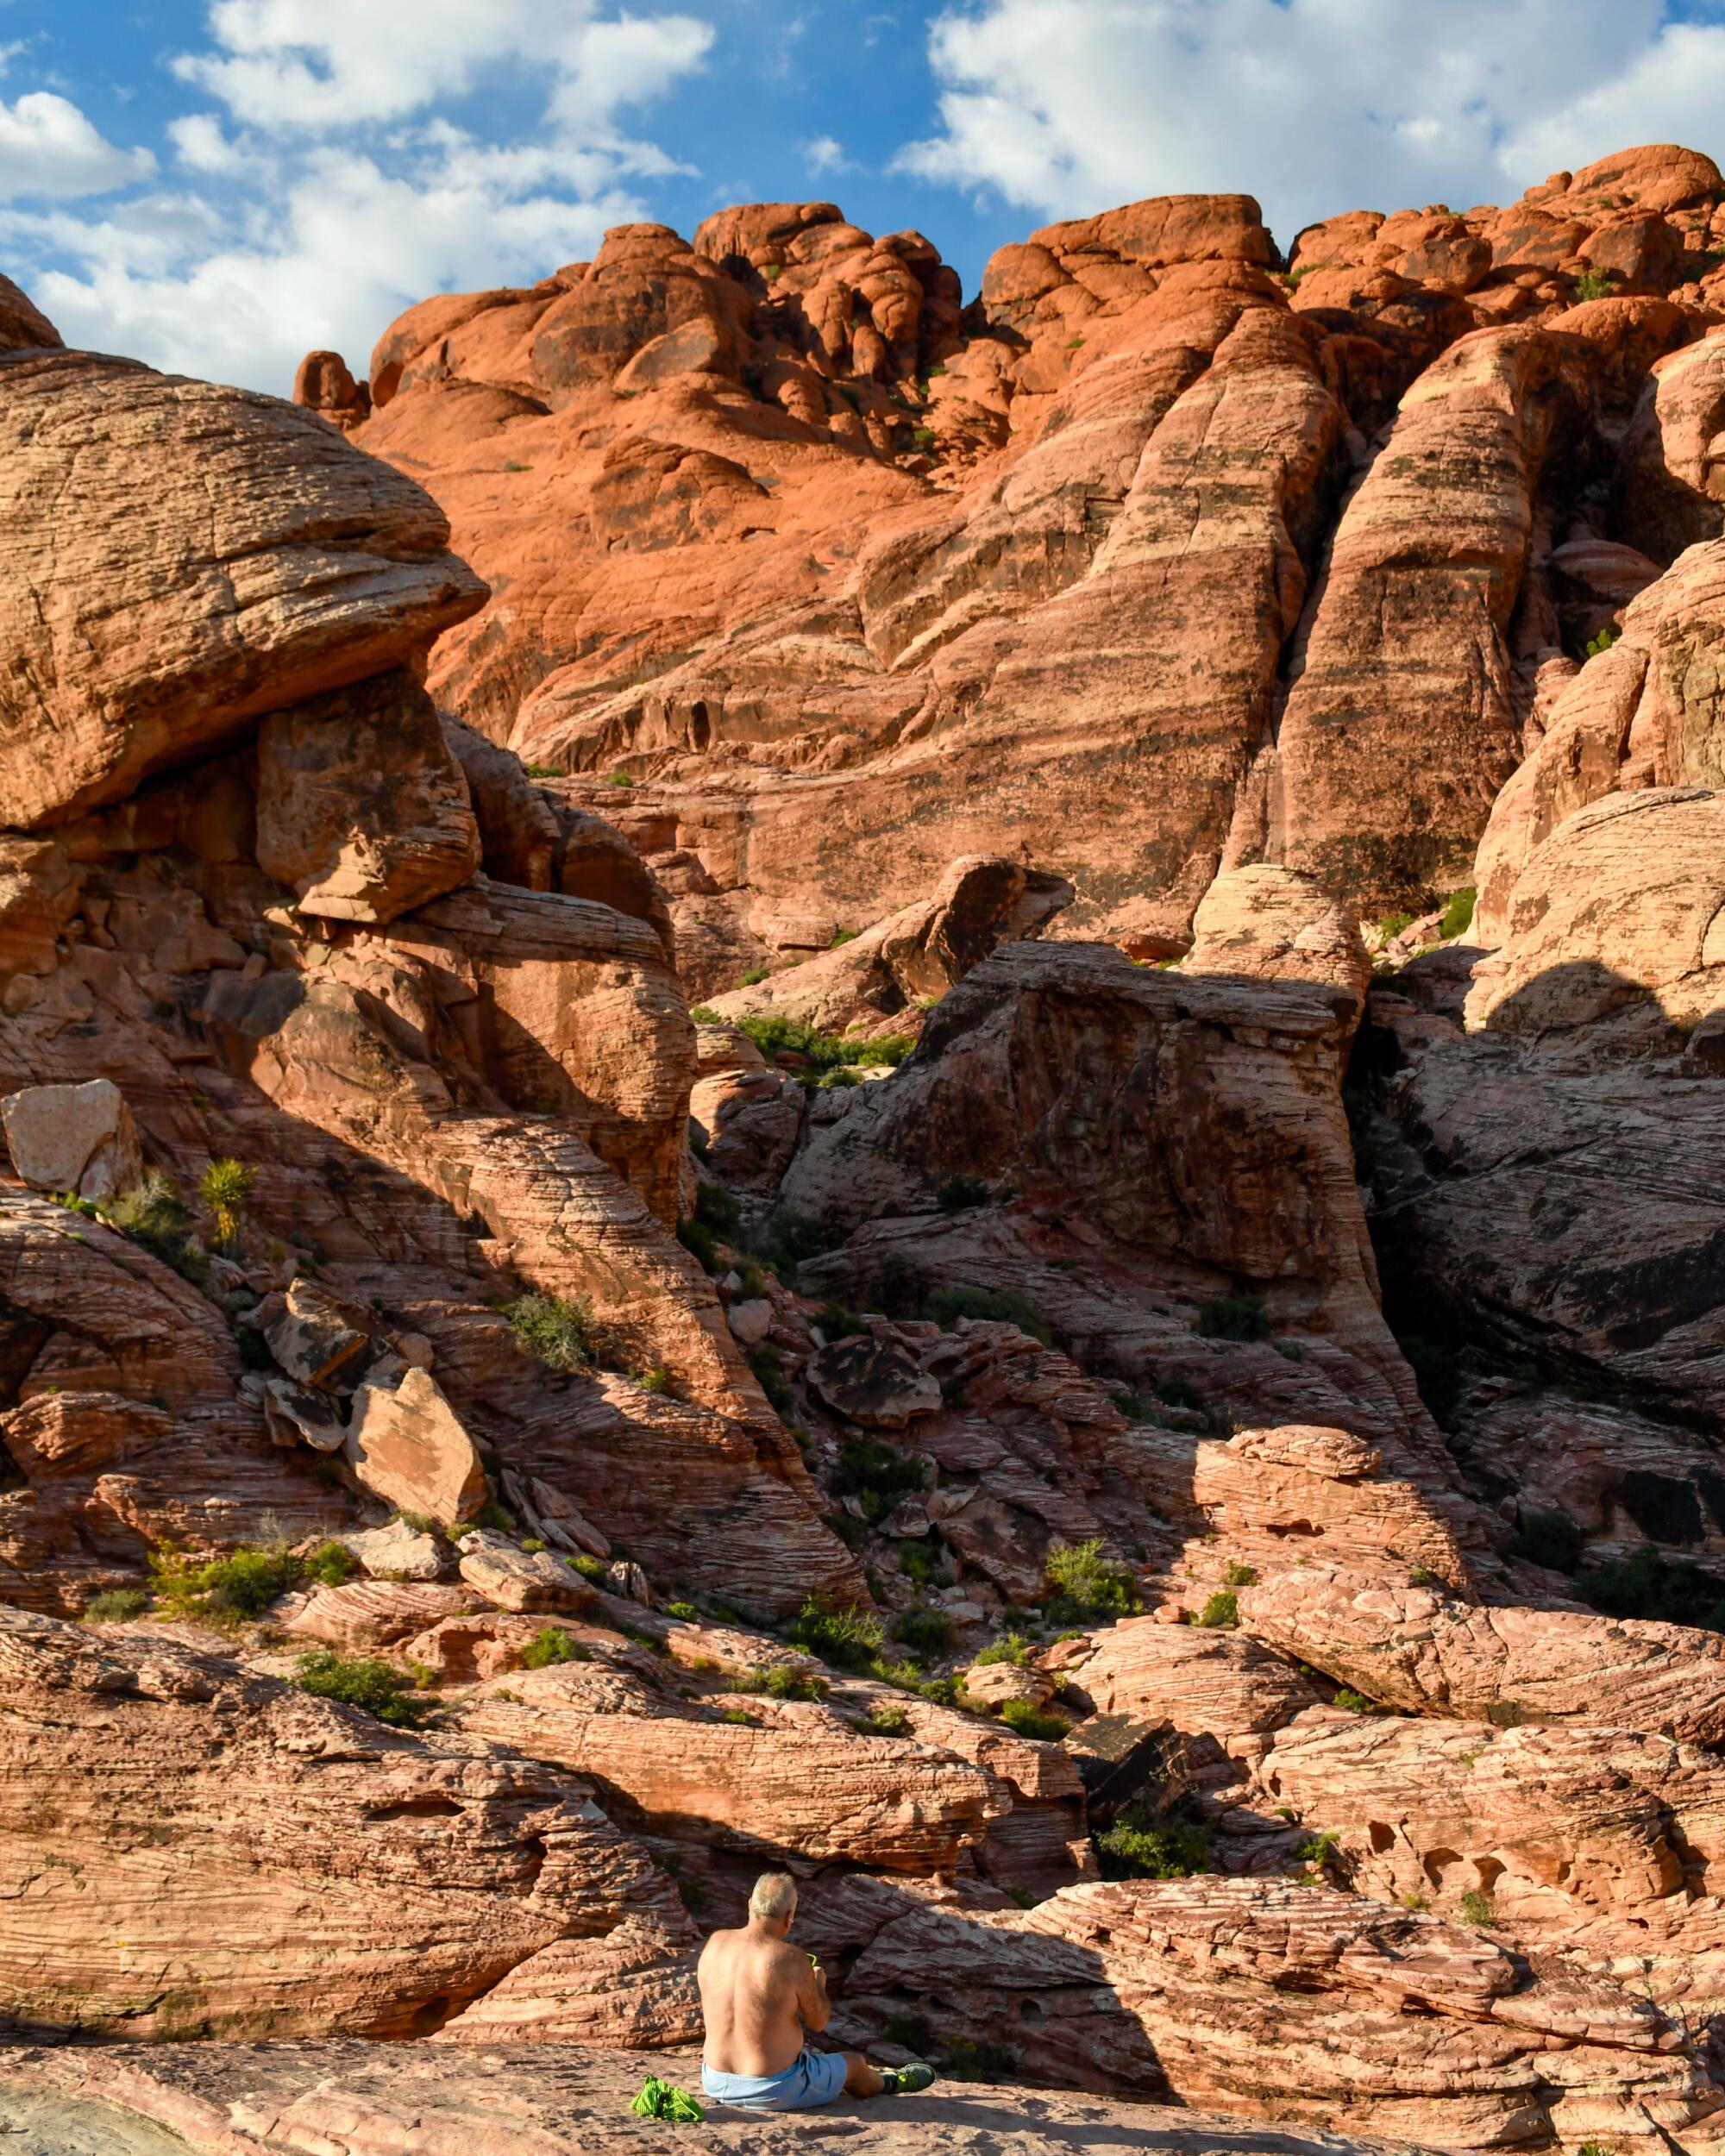 Striated rocks and red rock cliffsides at Red Rock Canyon Conservation Area.